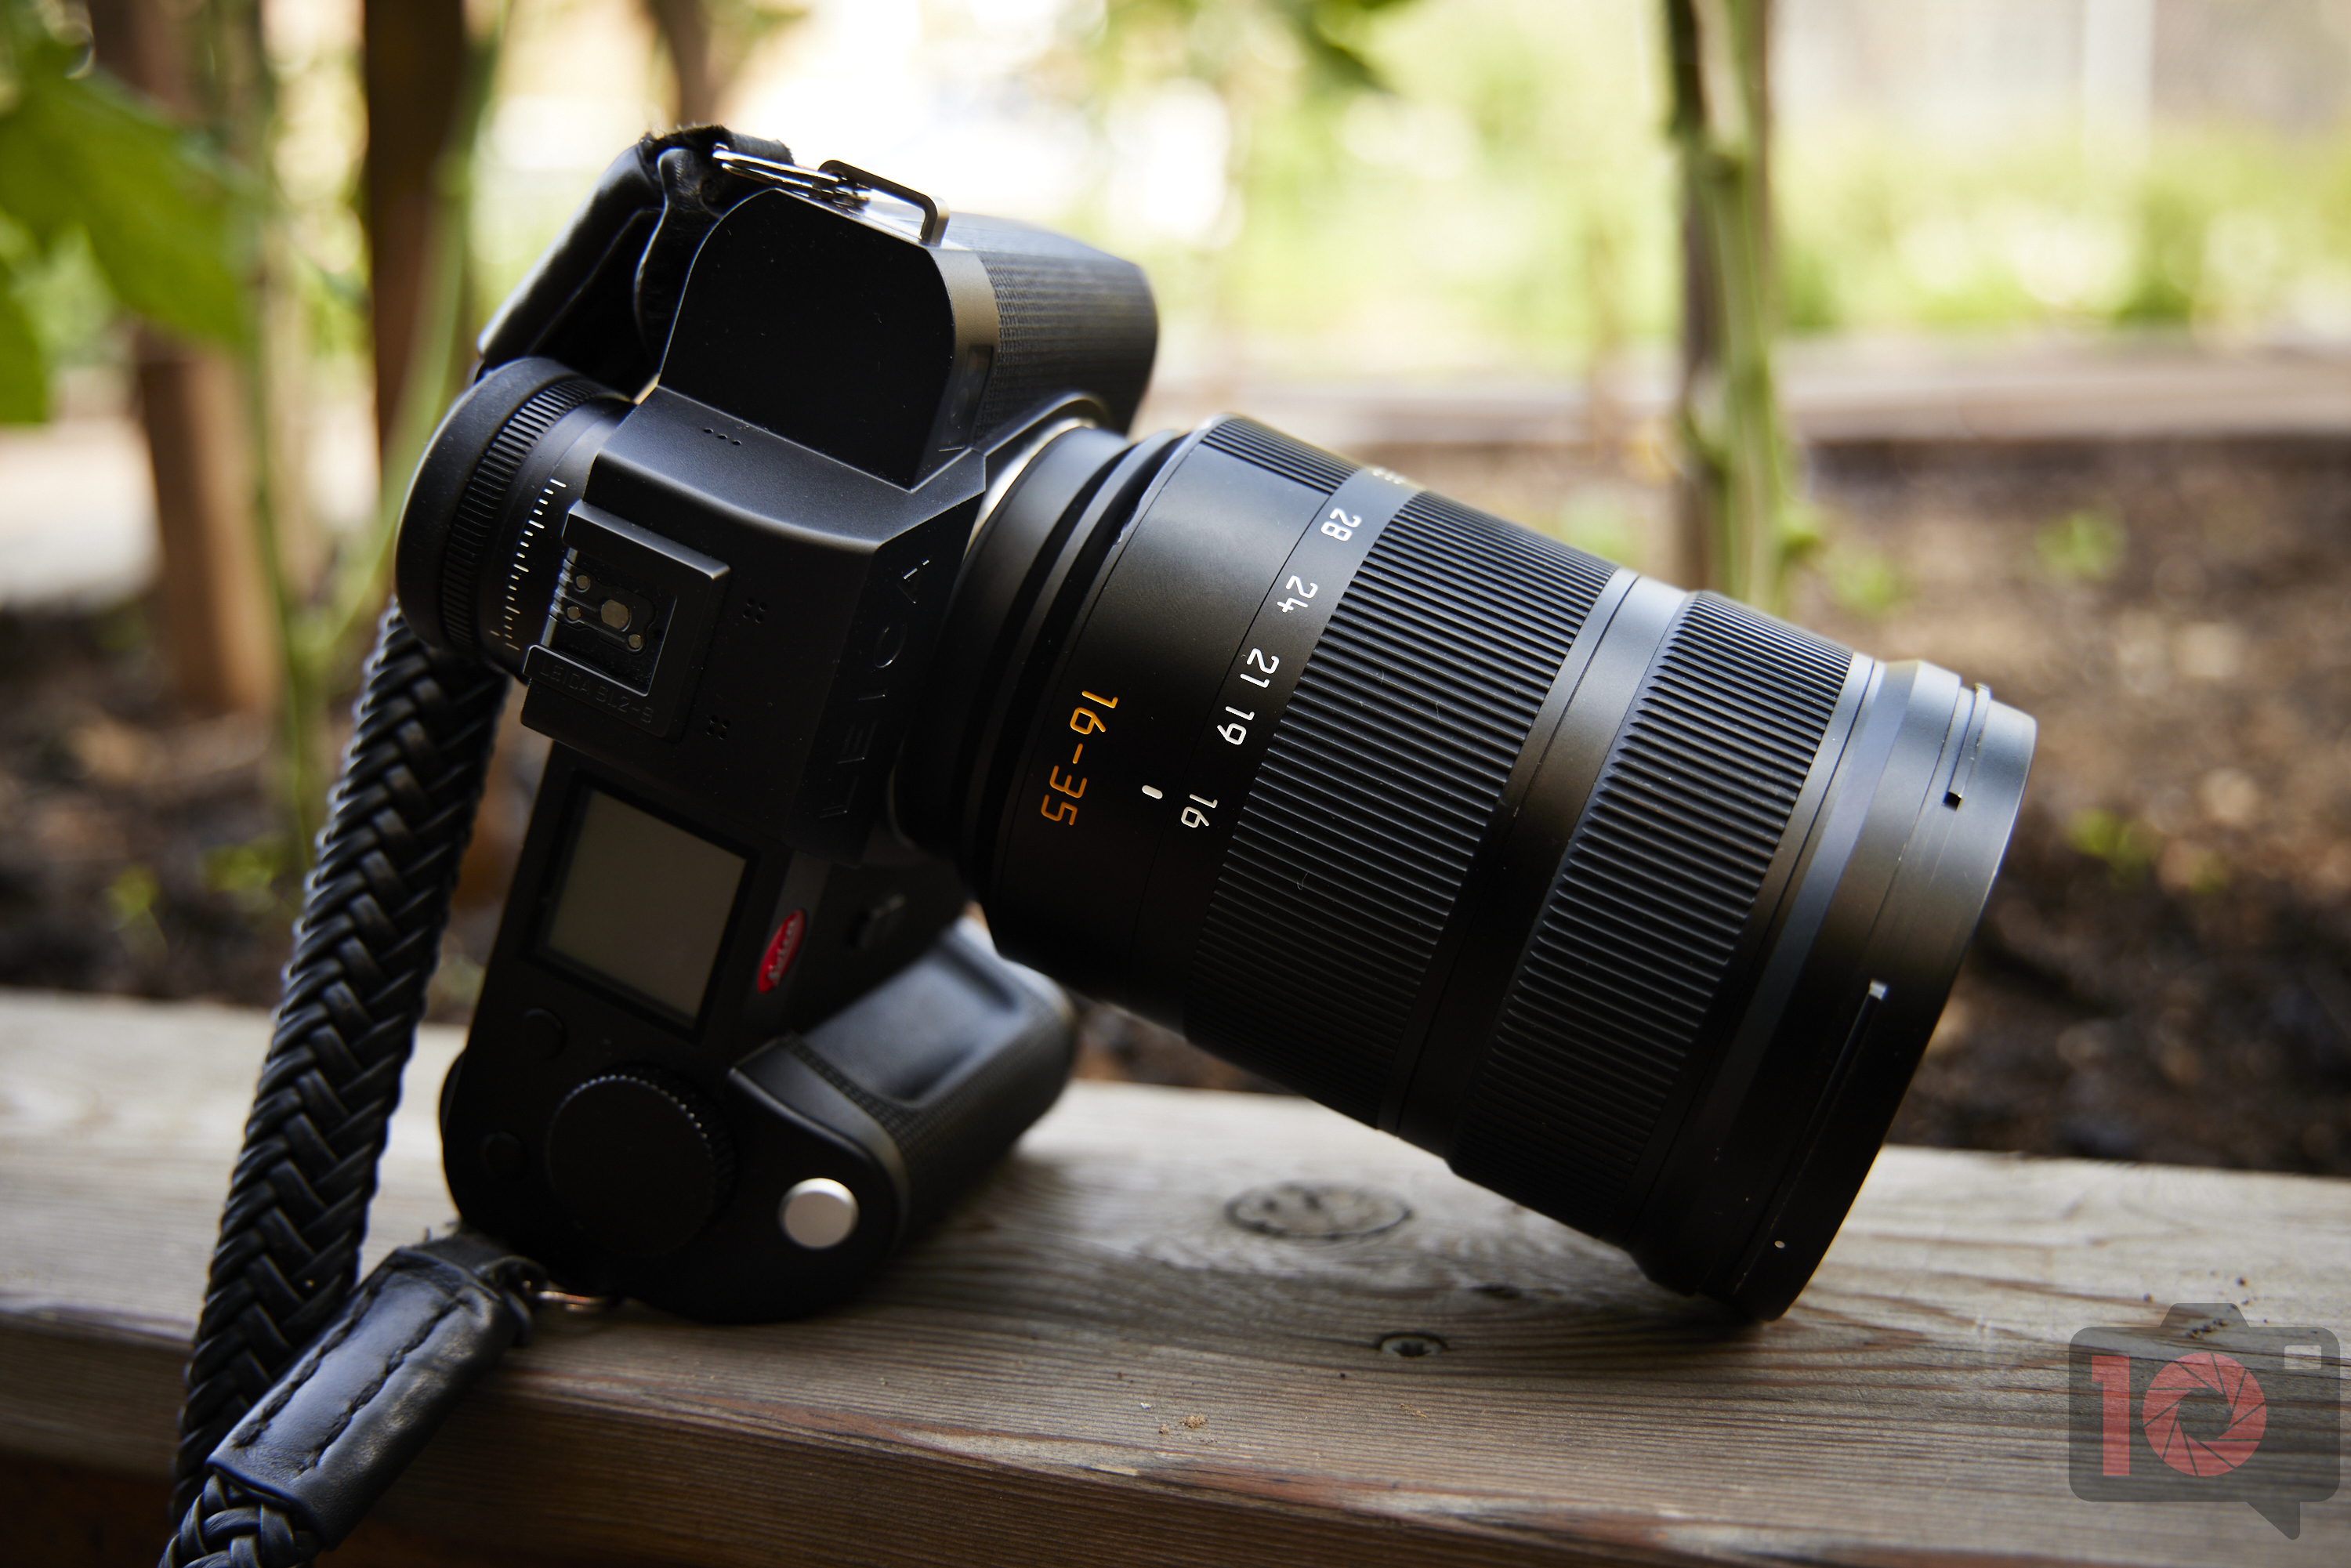 Chris Gampat The Phoblographer Leica 16-35mm f3.5-4 SL Review product images 41-200s400 8